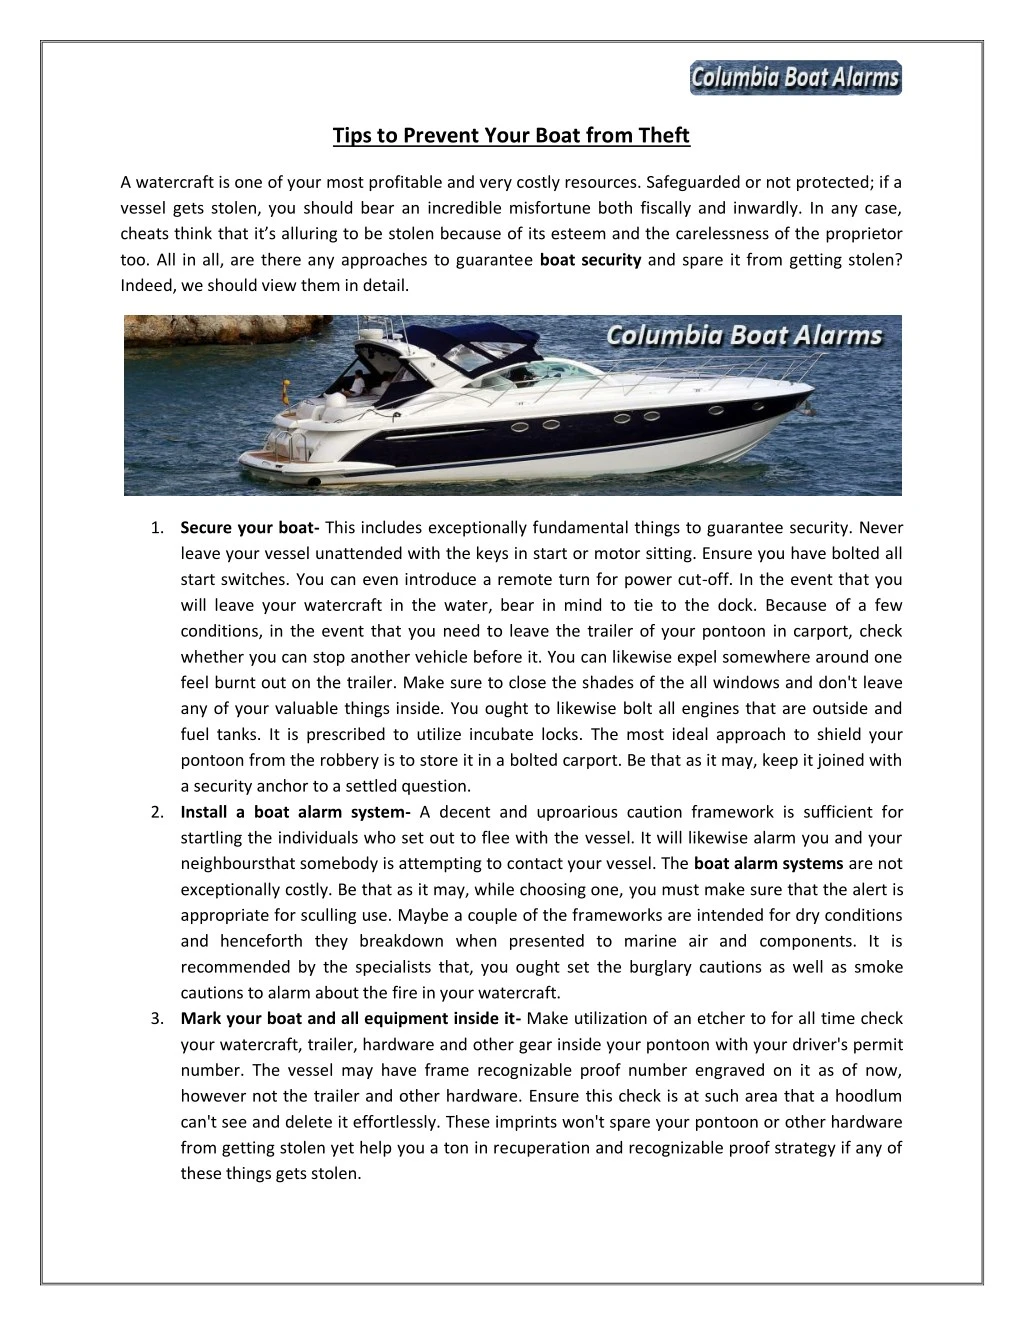 tips to prevent your boat from theft